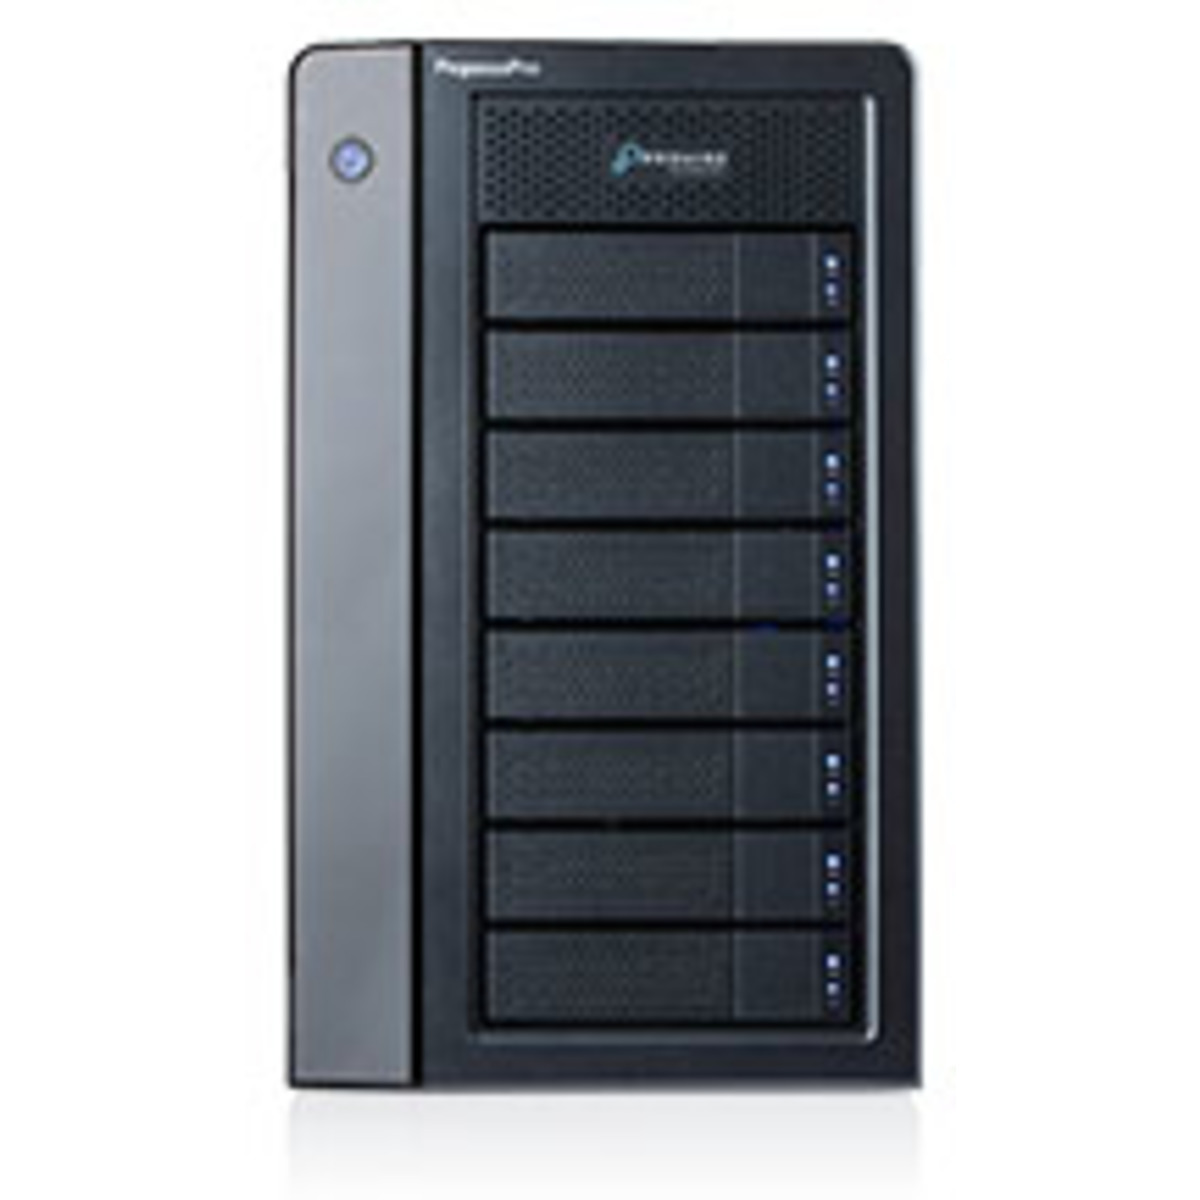 buy Promise Technology PegasusPro R8 Desktop DAS-NAS - Combo Direct + Network Storage Device Burn-In Tested Configurations - nas headquarters buy network attached storage server device das new raid-5 free shipping usa christmas new year holiday sale PegasusPro R8